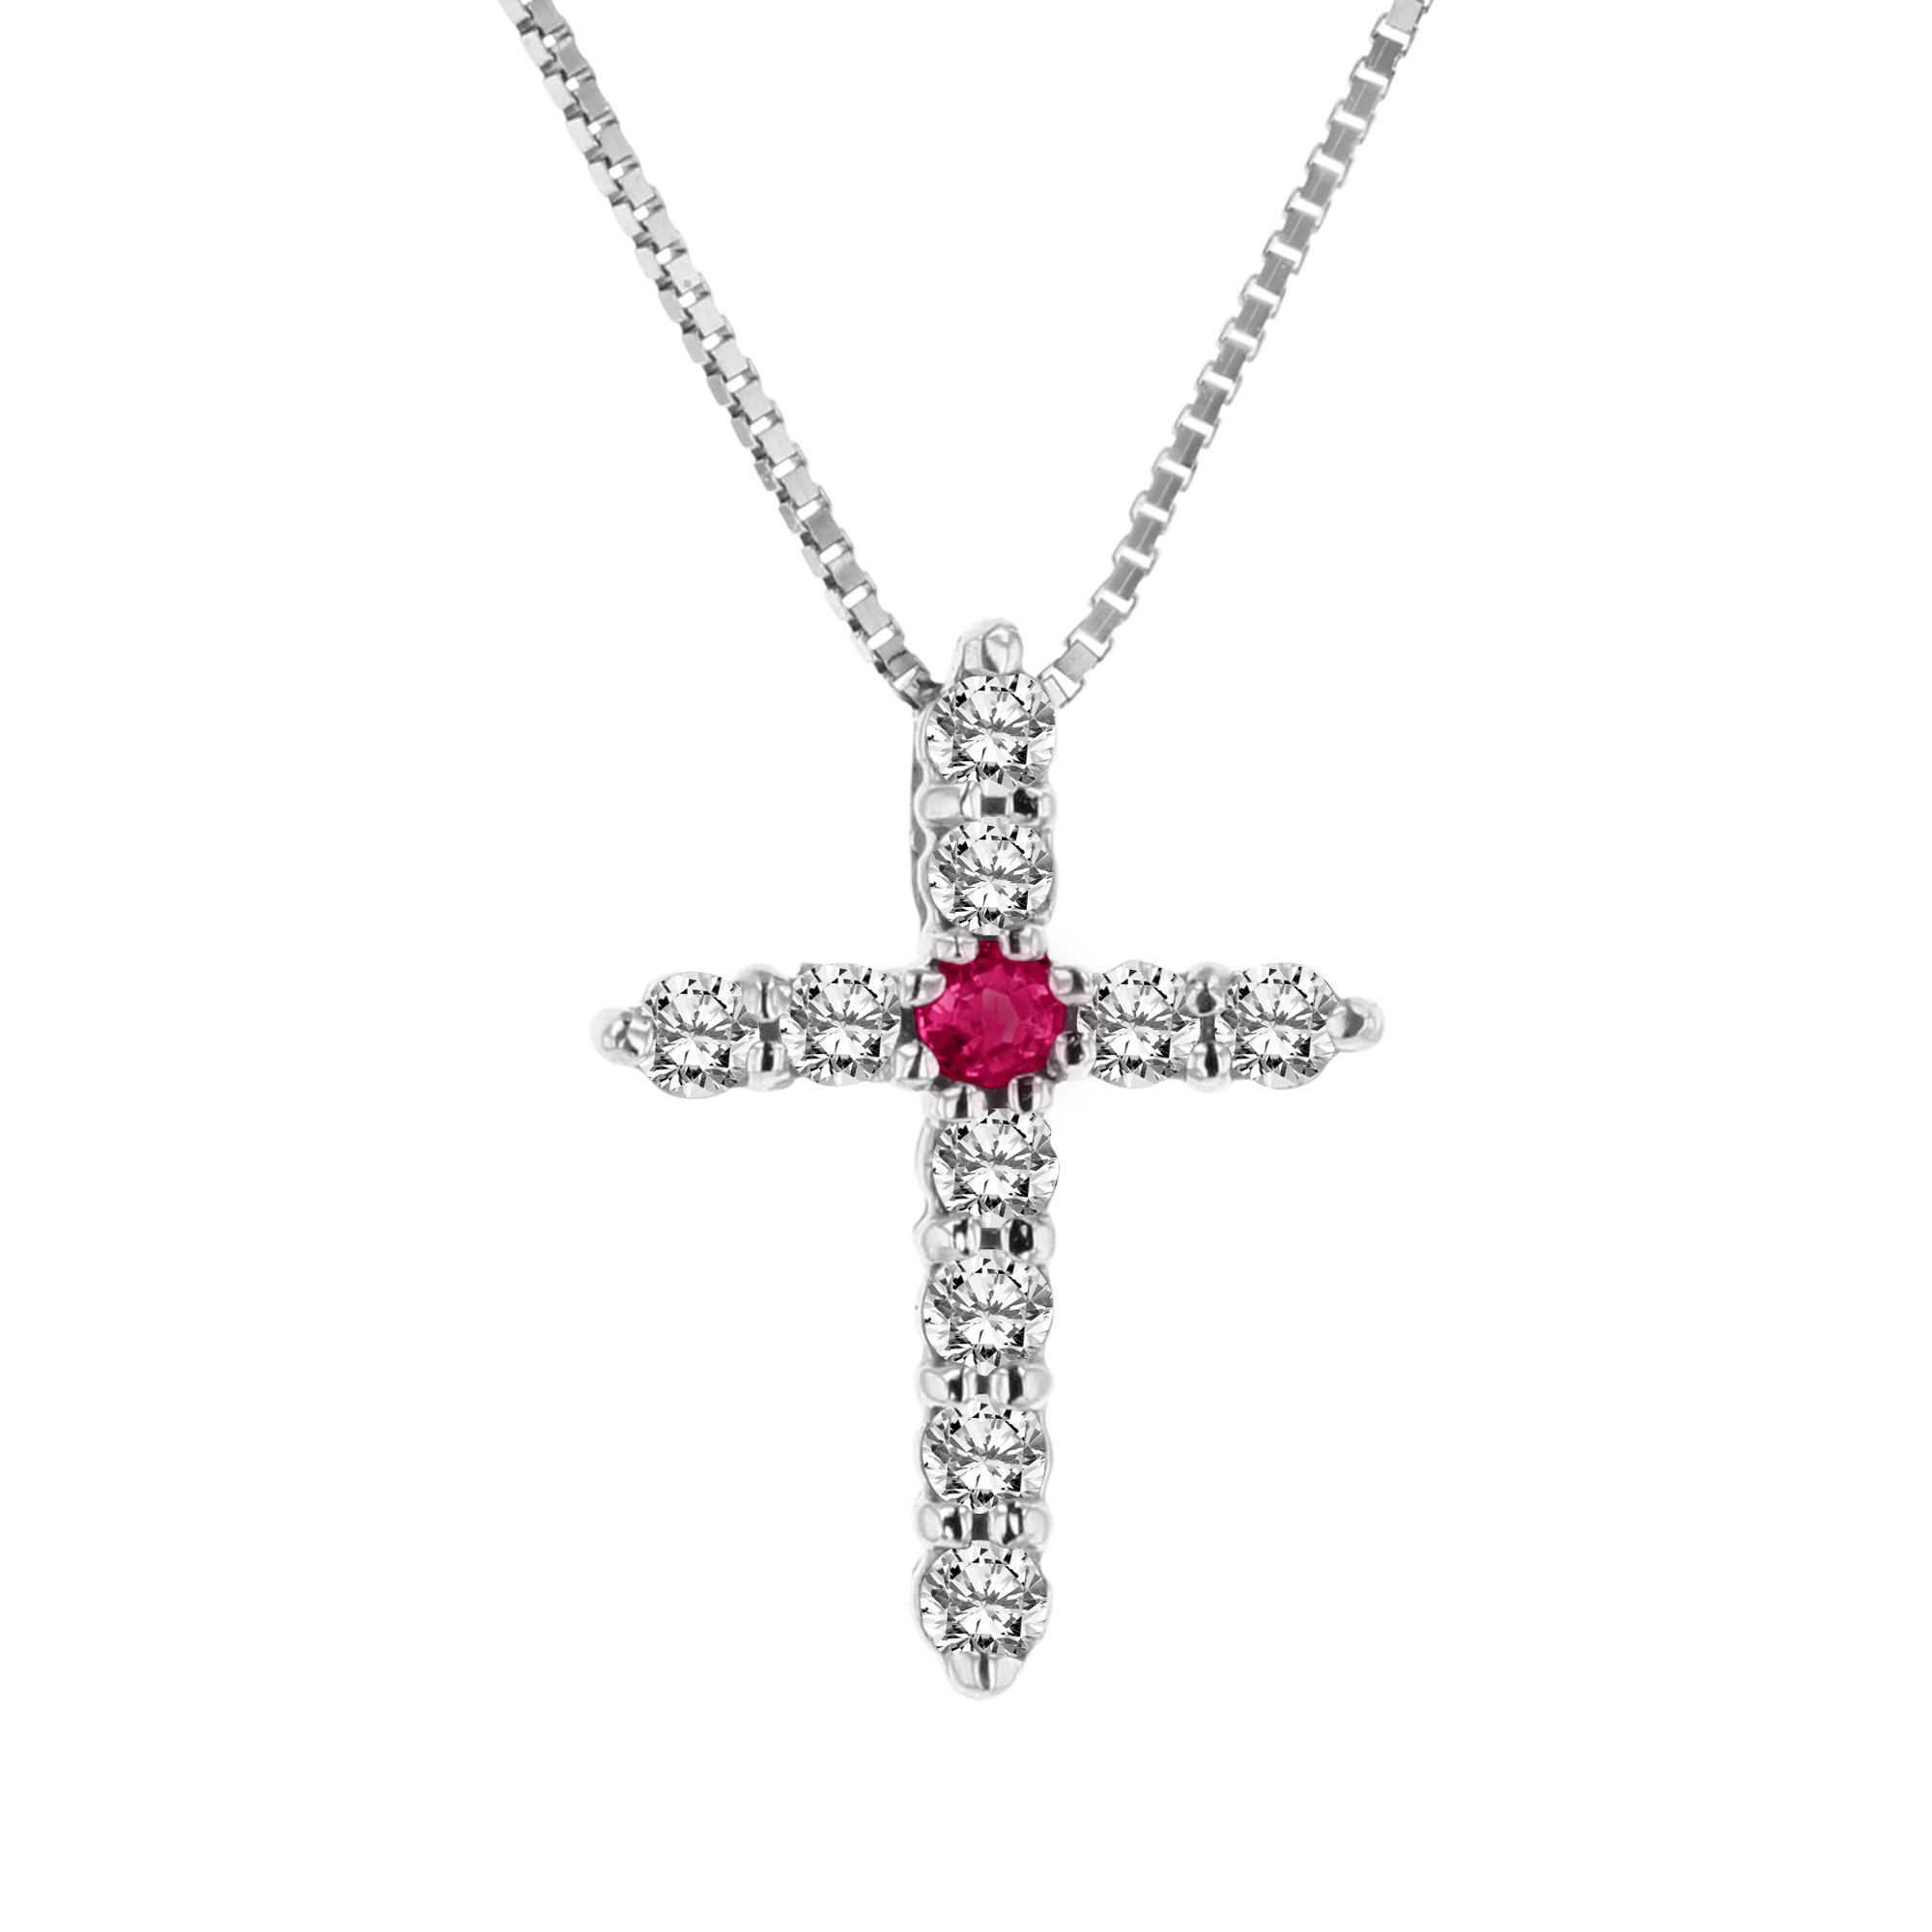 View 0.18ctw Diamond and Ruby Cross in 14K Gold